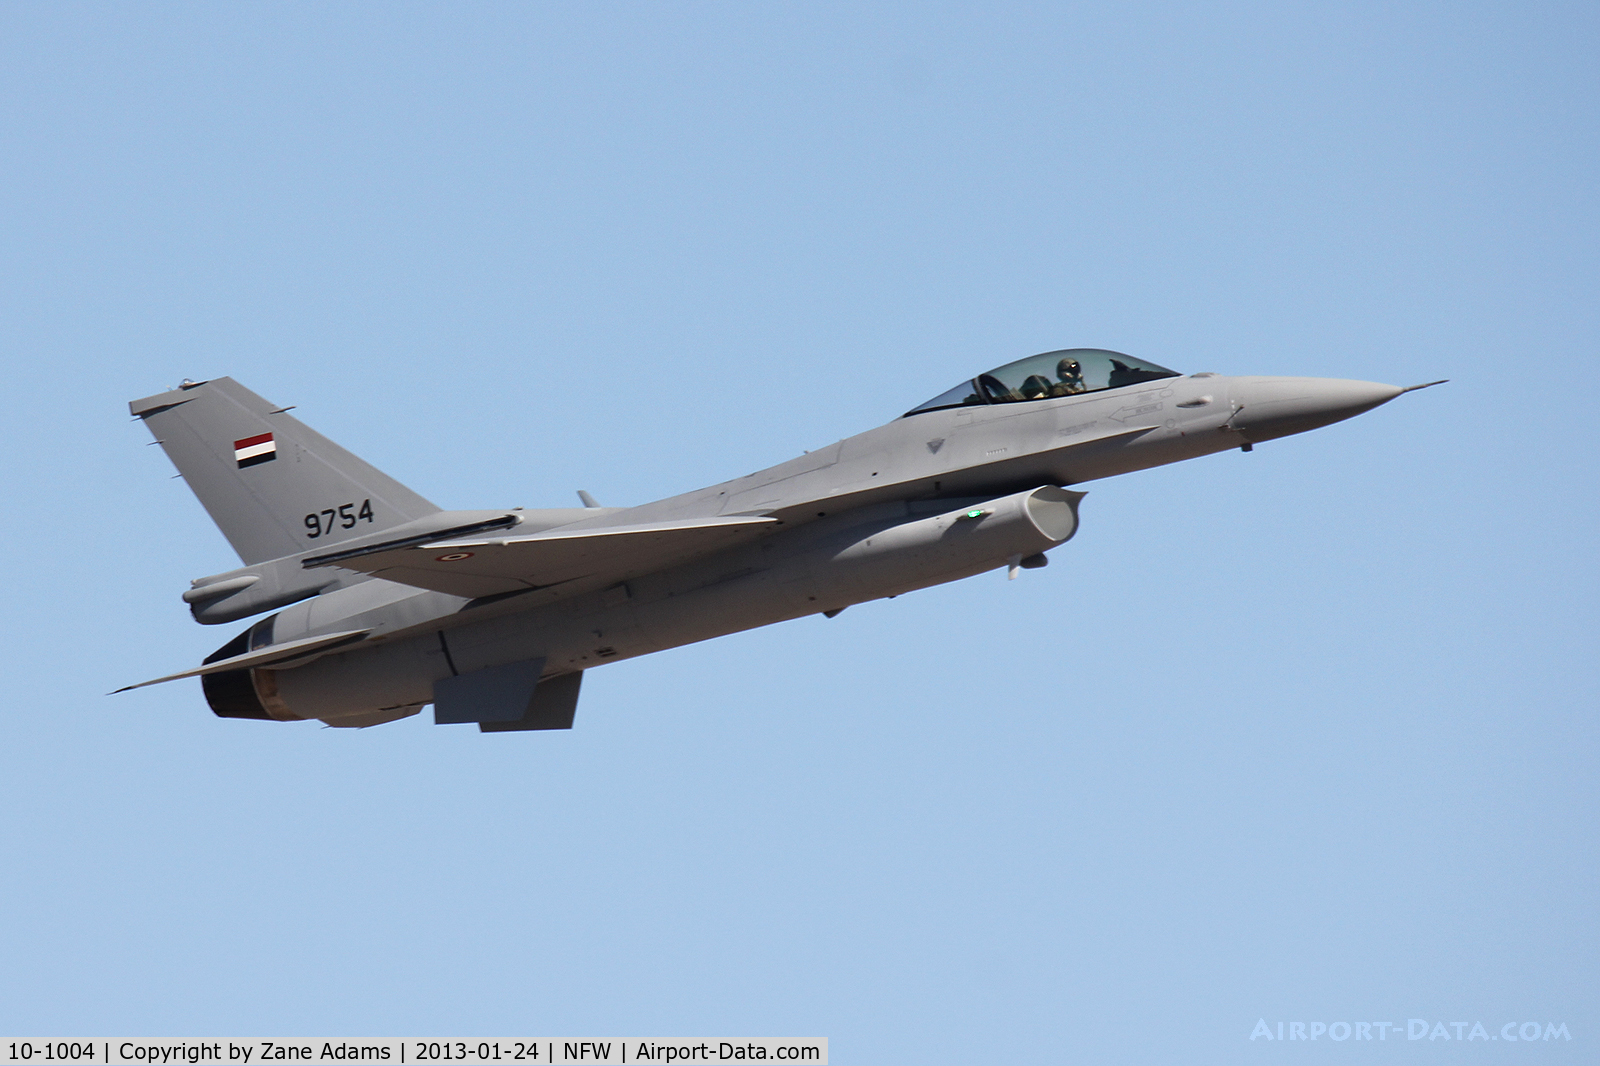 10-1004, 2010 Lockheed Martin F-16C Fighting Falcon C/N JJ-04, Egyptian Air Force F-16C on a pre-delivery test flight at NASNRB Fort Worth